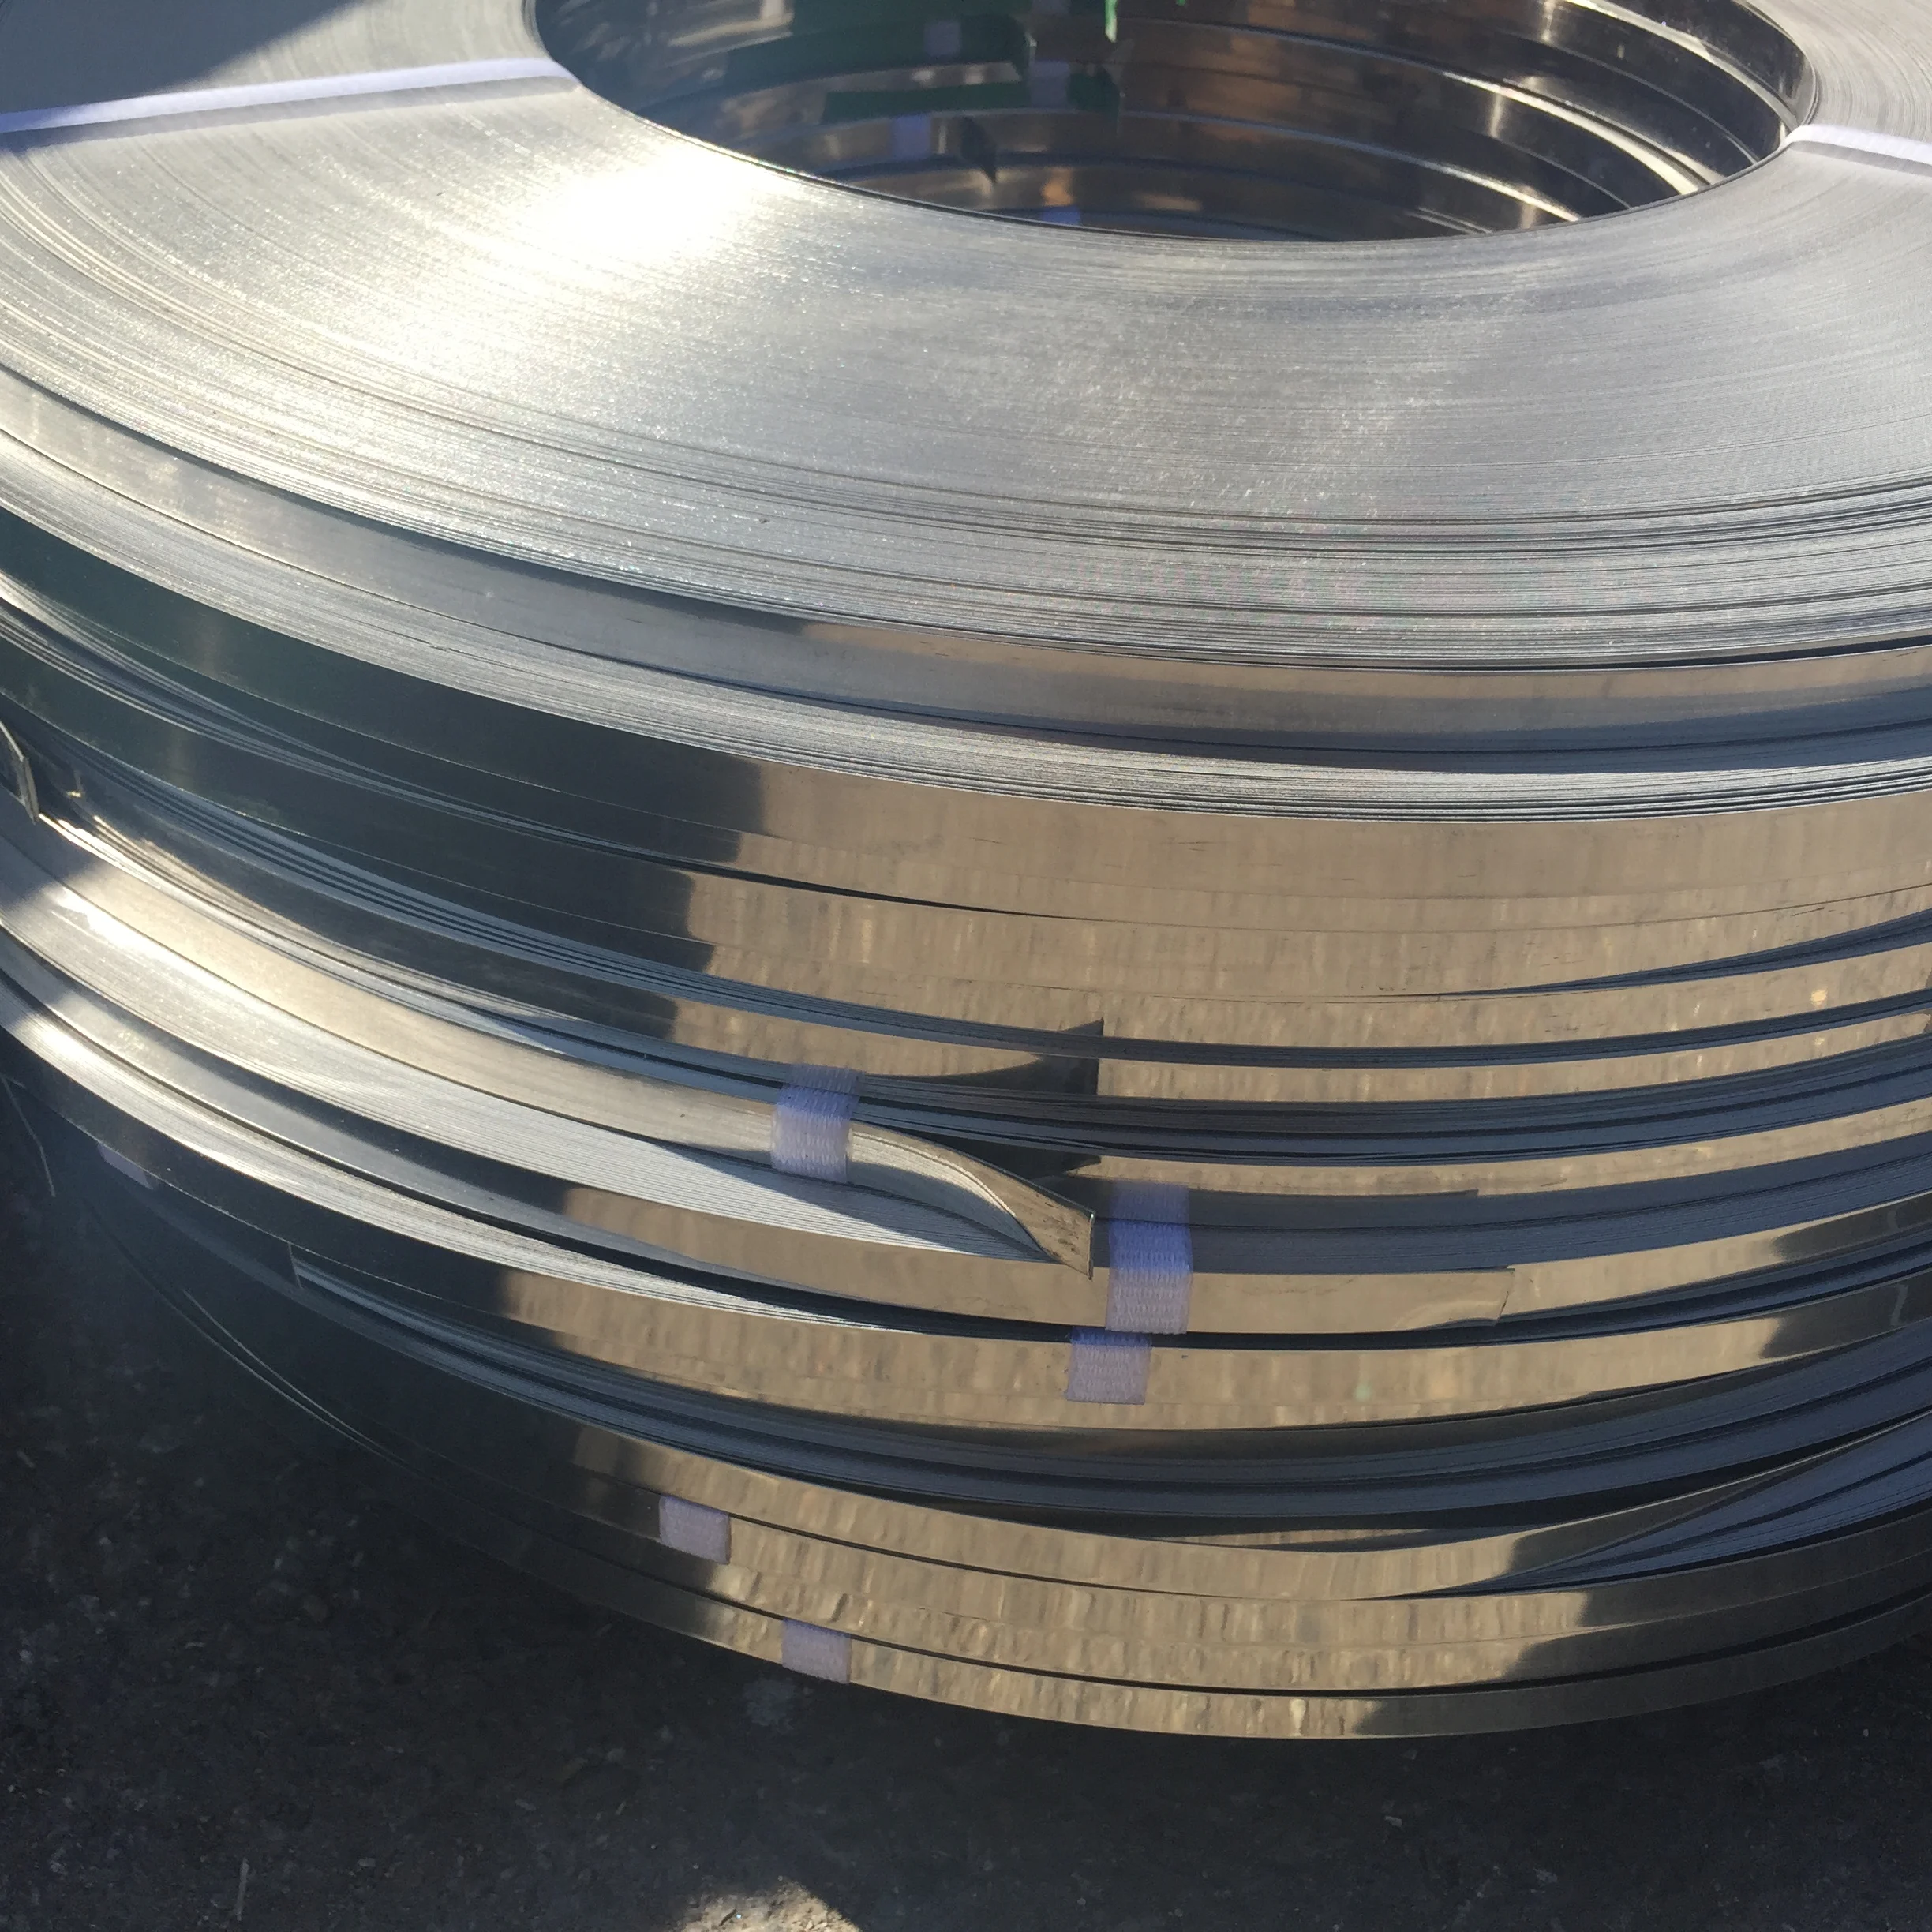 Cheap Price Corrosion Resistant Alloy Inconel 600 601 625 718 X750 Coil Strip Nickel Incoloy Alloy Tapes